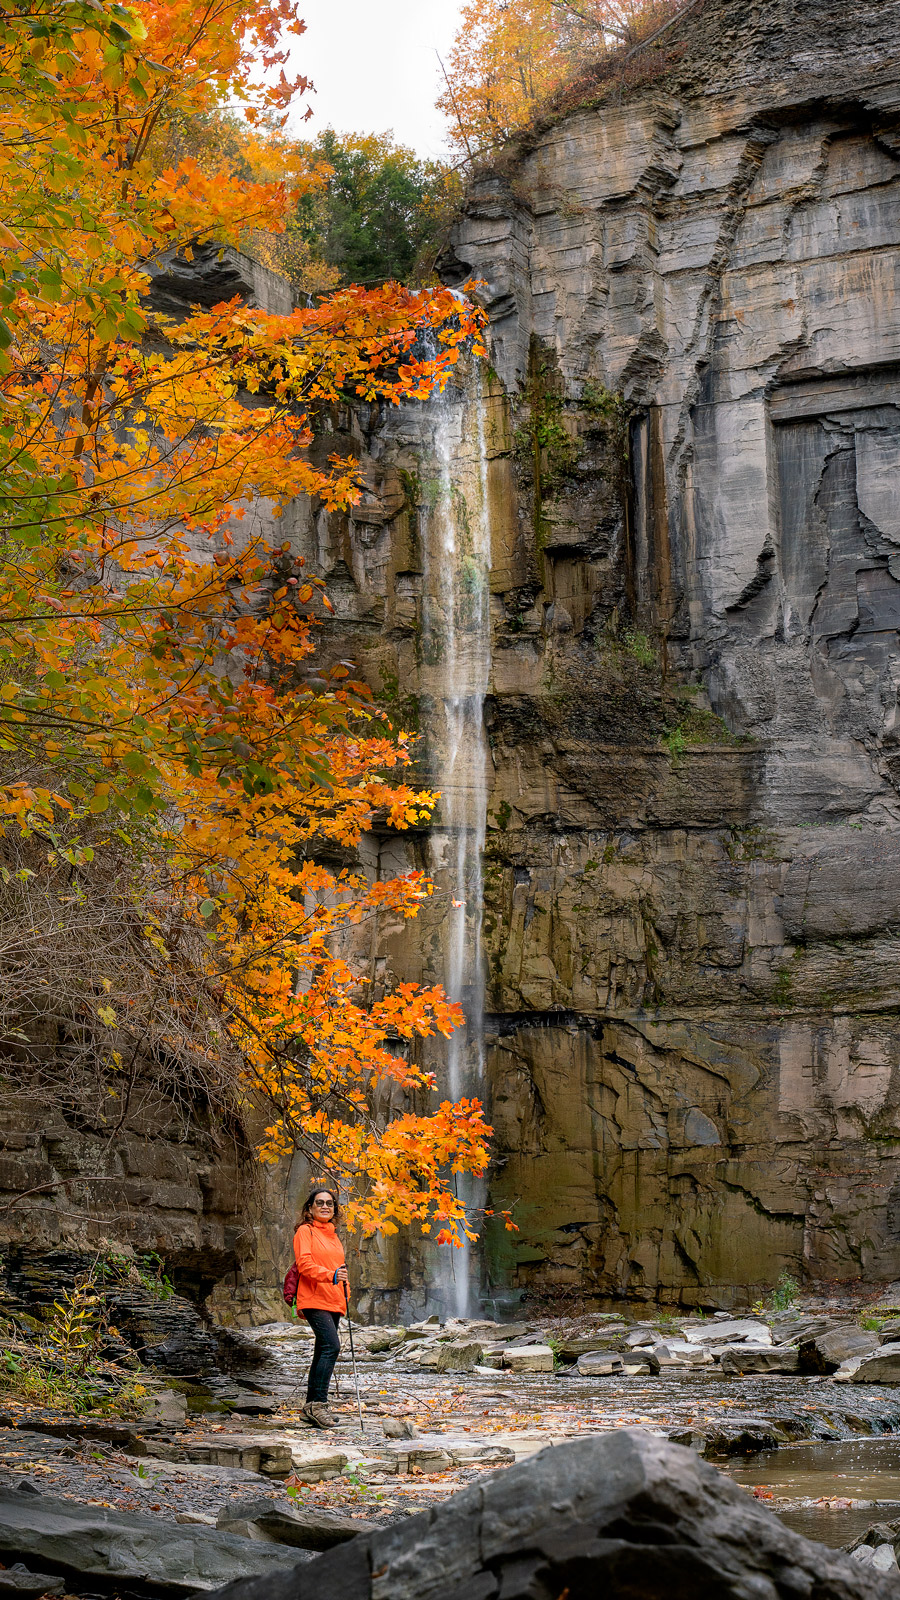 Taughannock Falls in autumn with golden leaves by Quang Phan